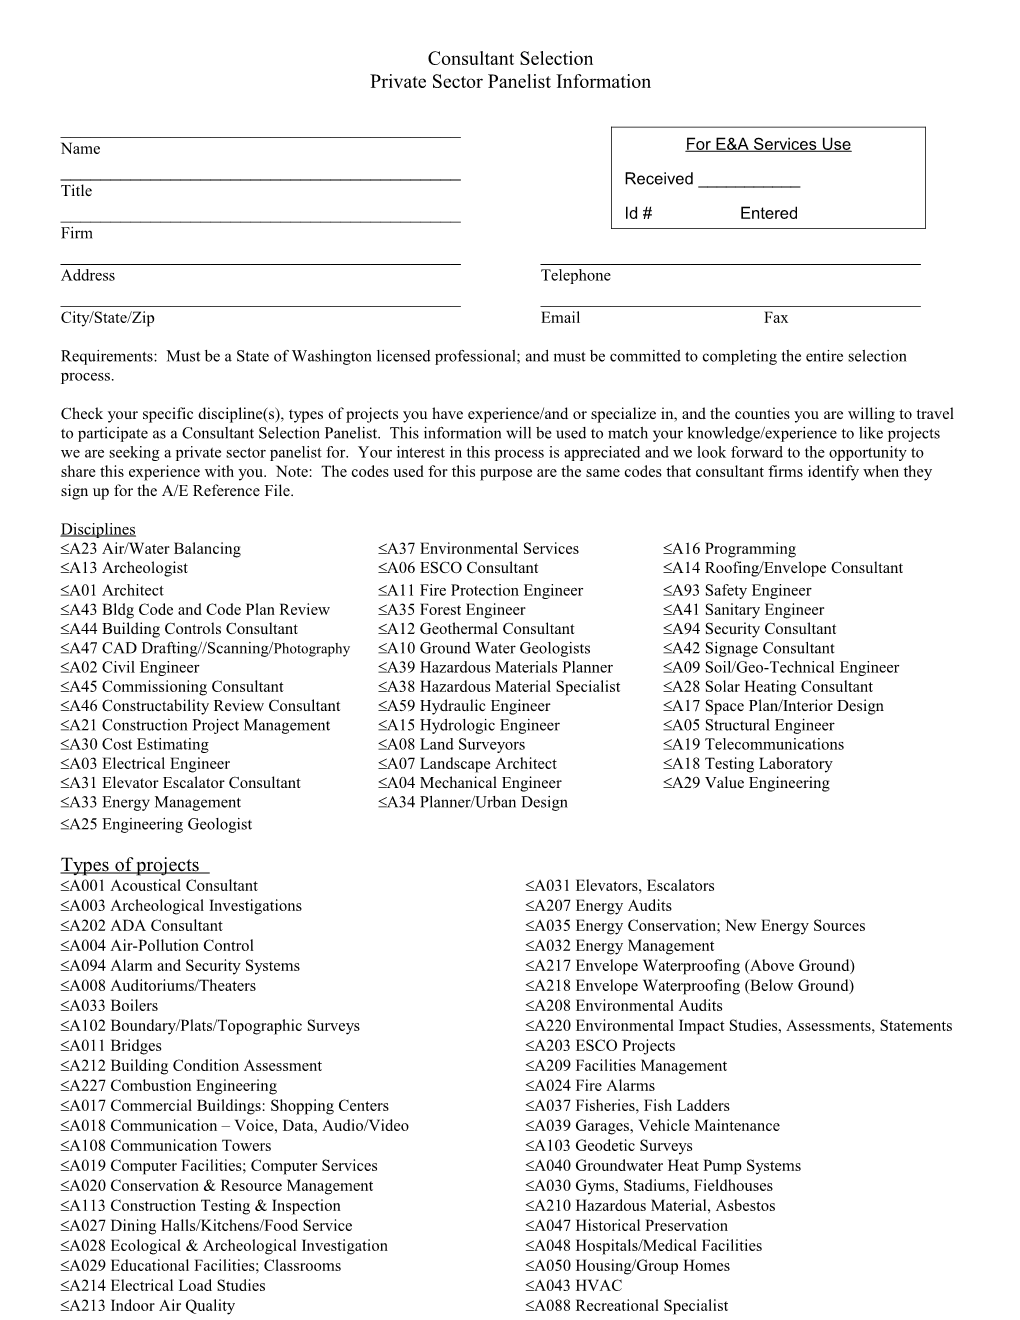 EAS: A/E Reference Consultant Selection Form